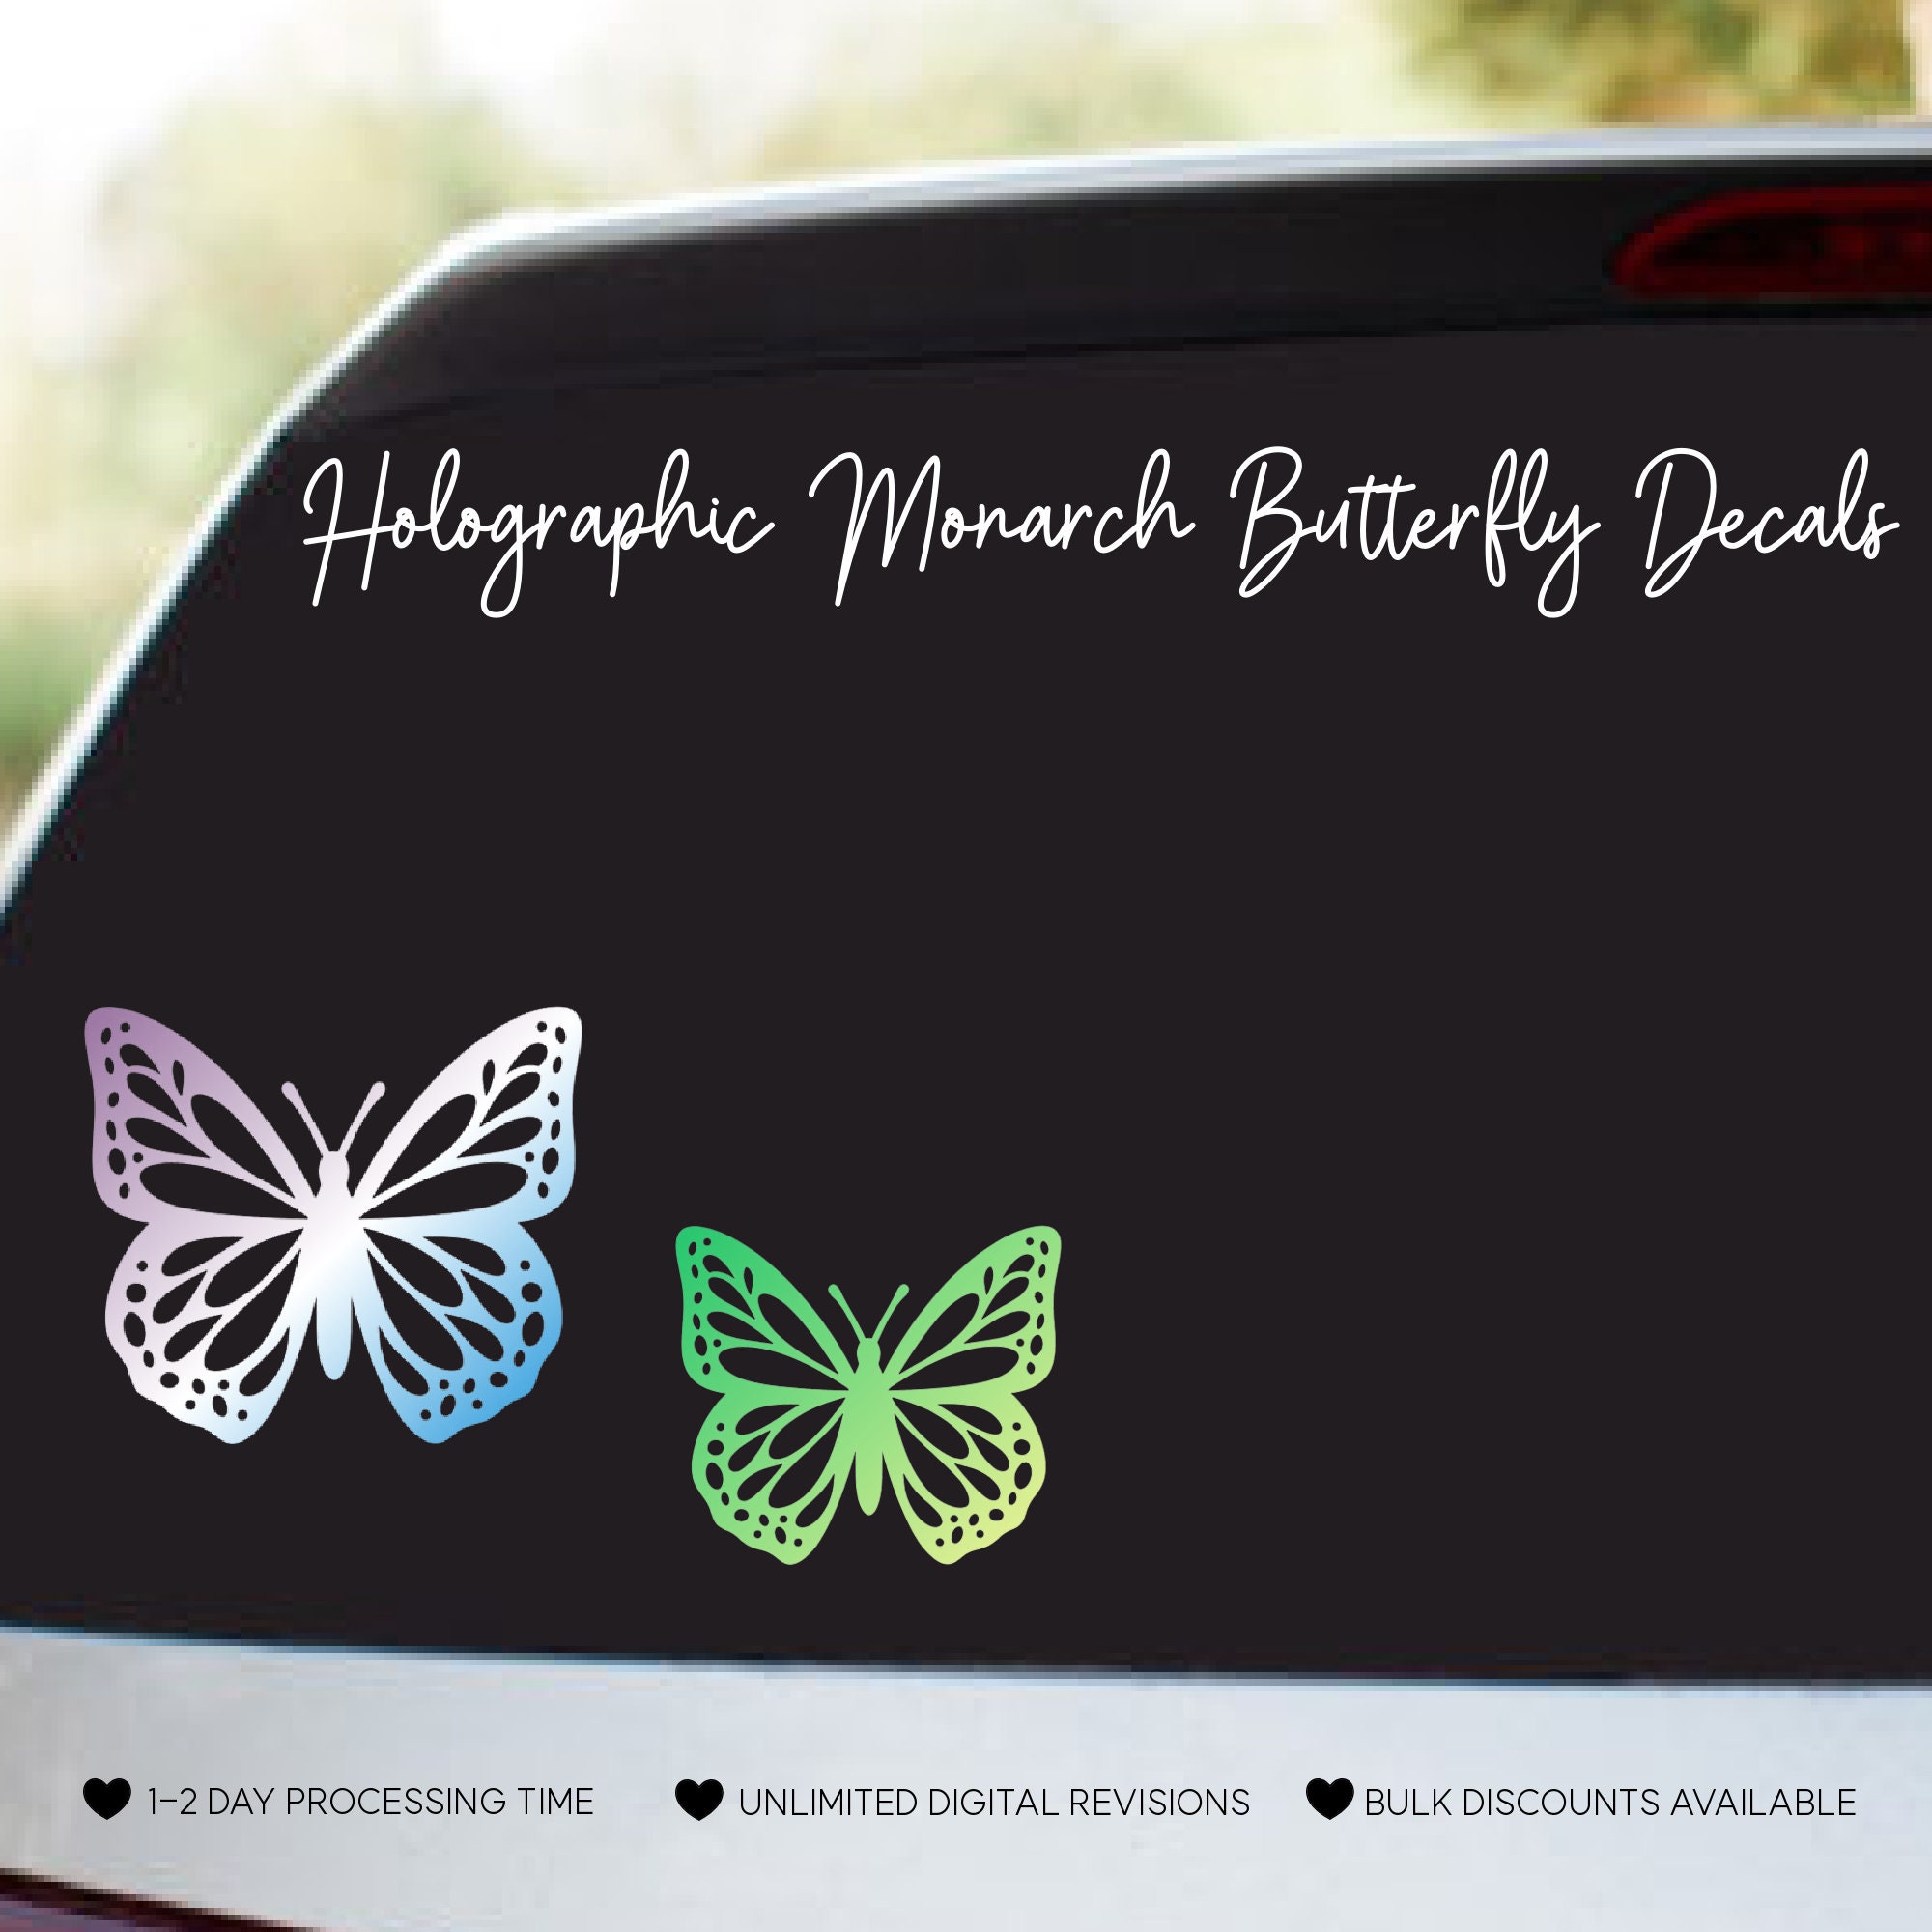 Holographic Resin Stickers- Dove Butterfly Heart series – Khushi Handicrafts